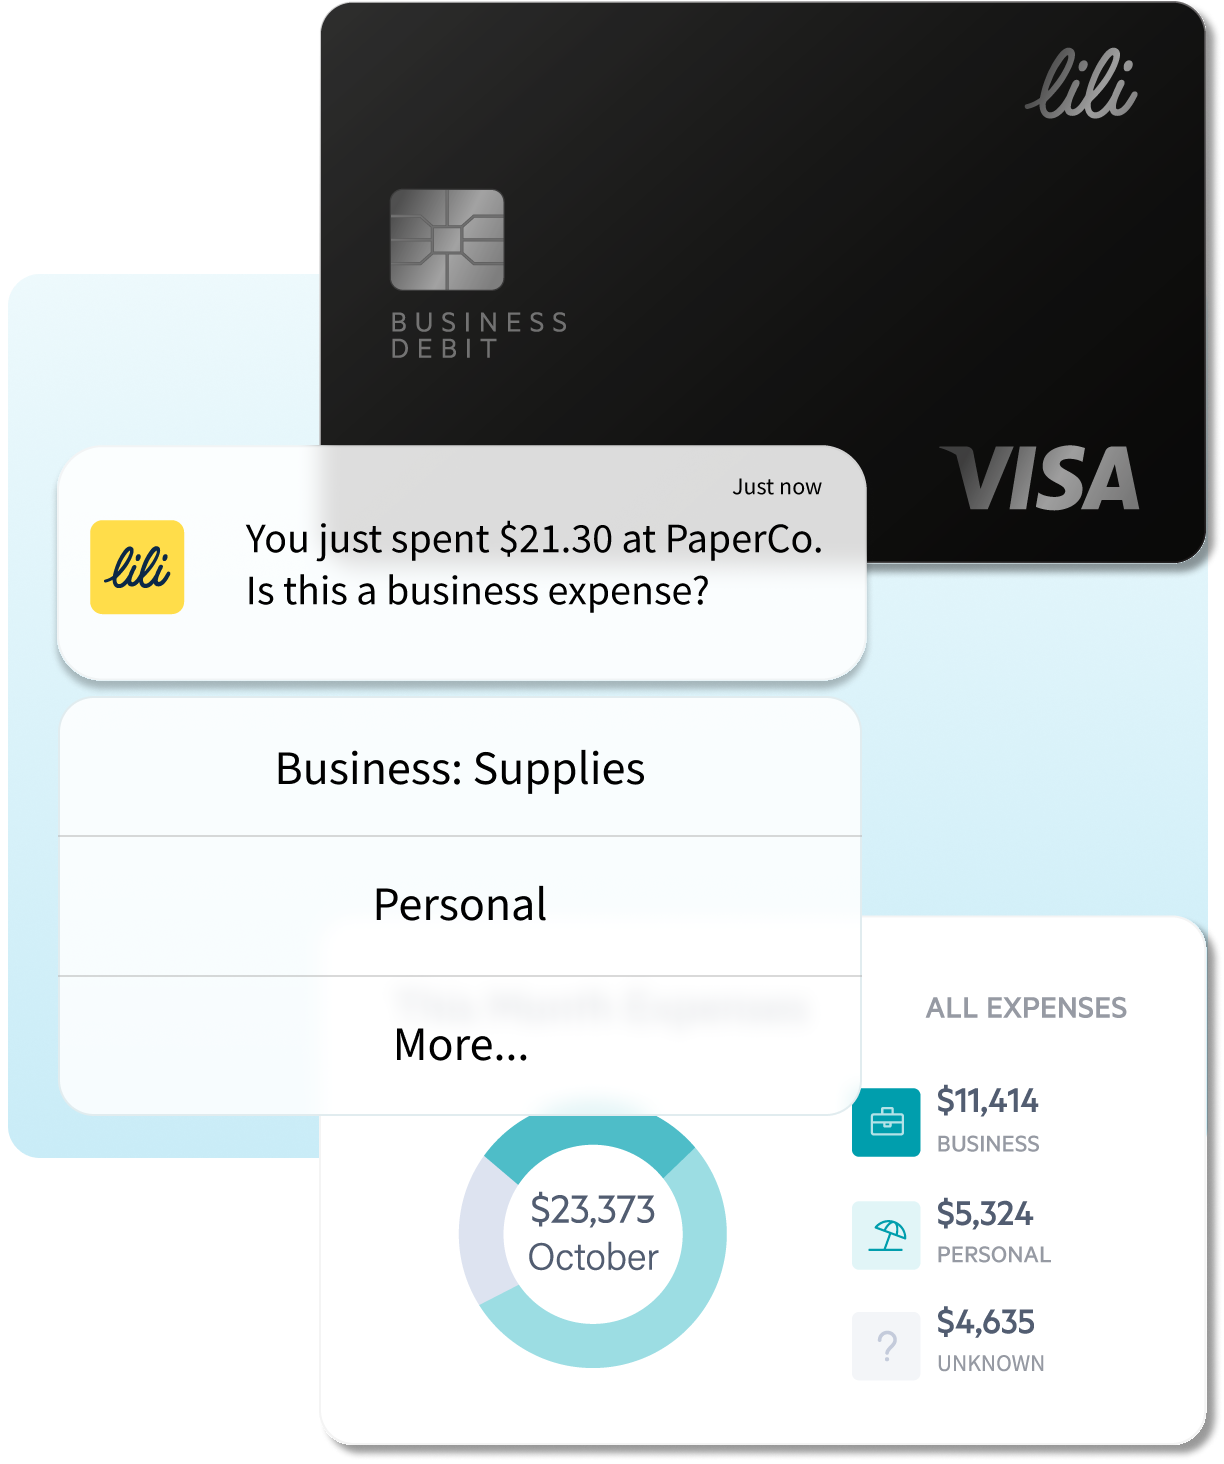 The Lili Visa business debit card overlaid with a mobile notification about an expense with the ability to categorize it as business or personal, and an expense insights product screen from Lili's mobile app.